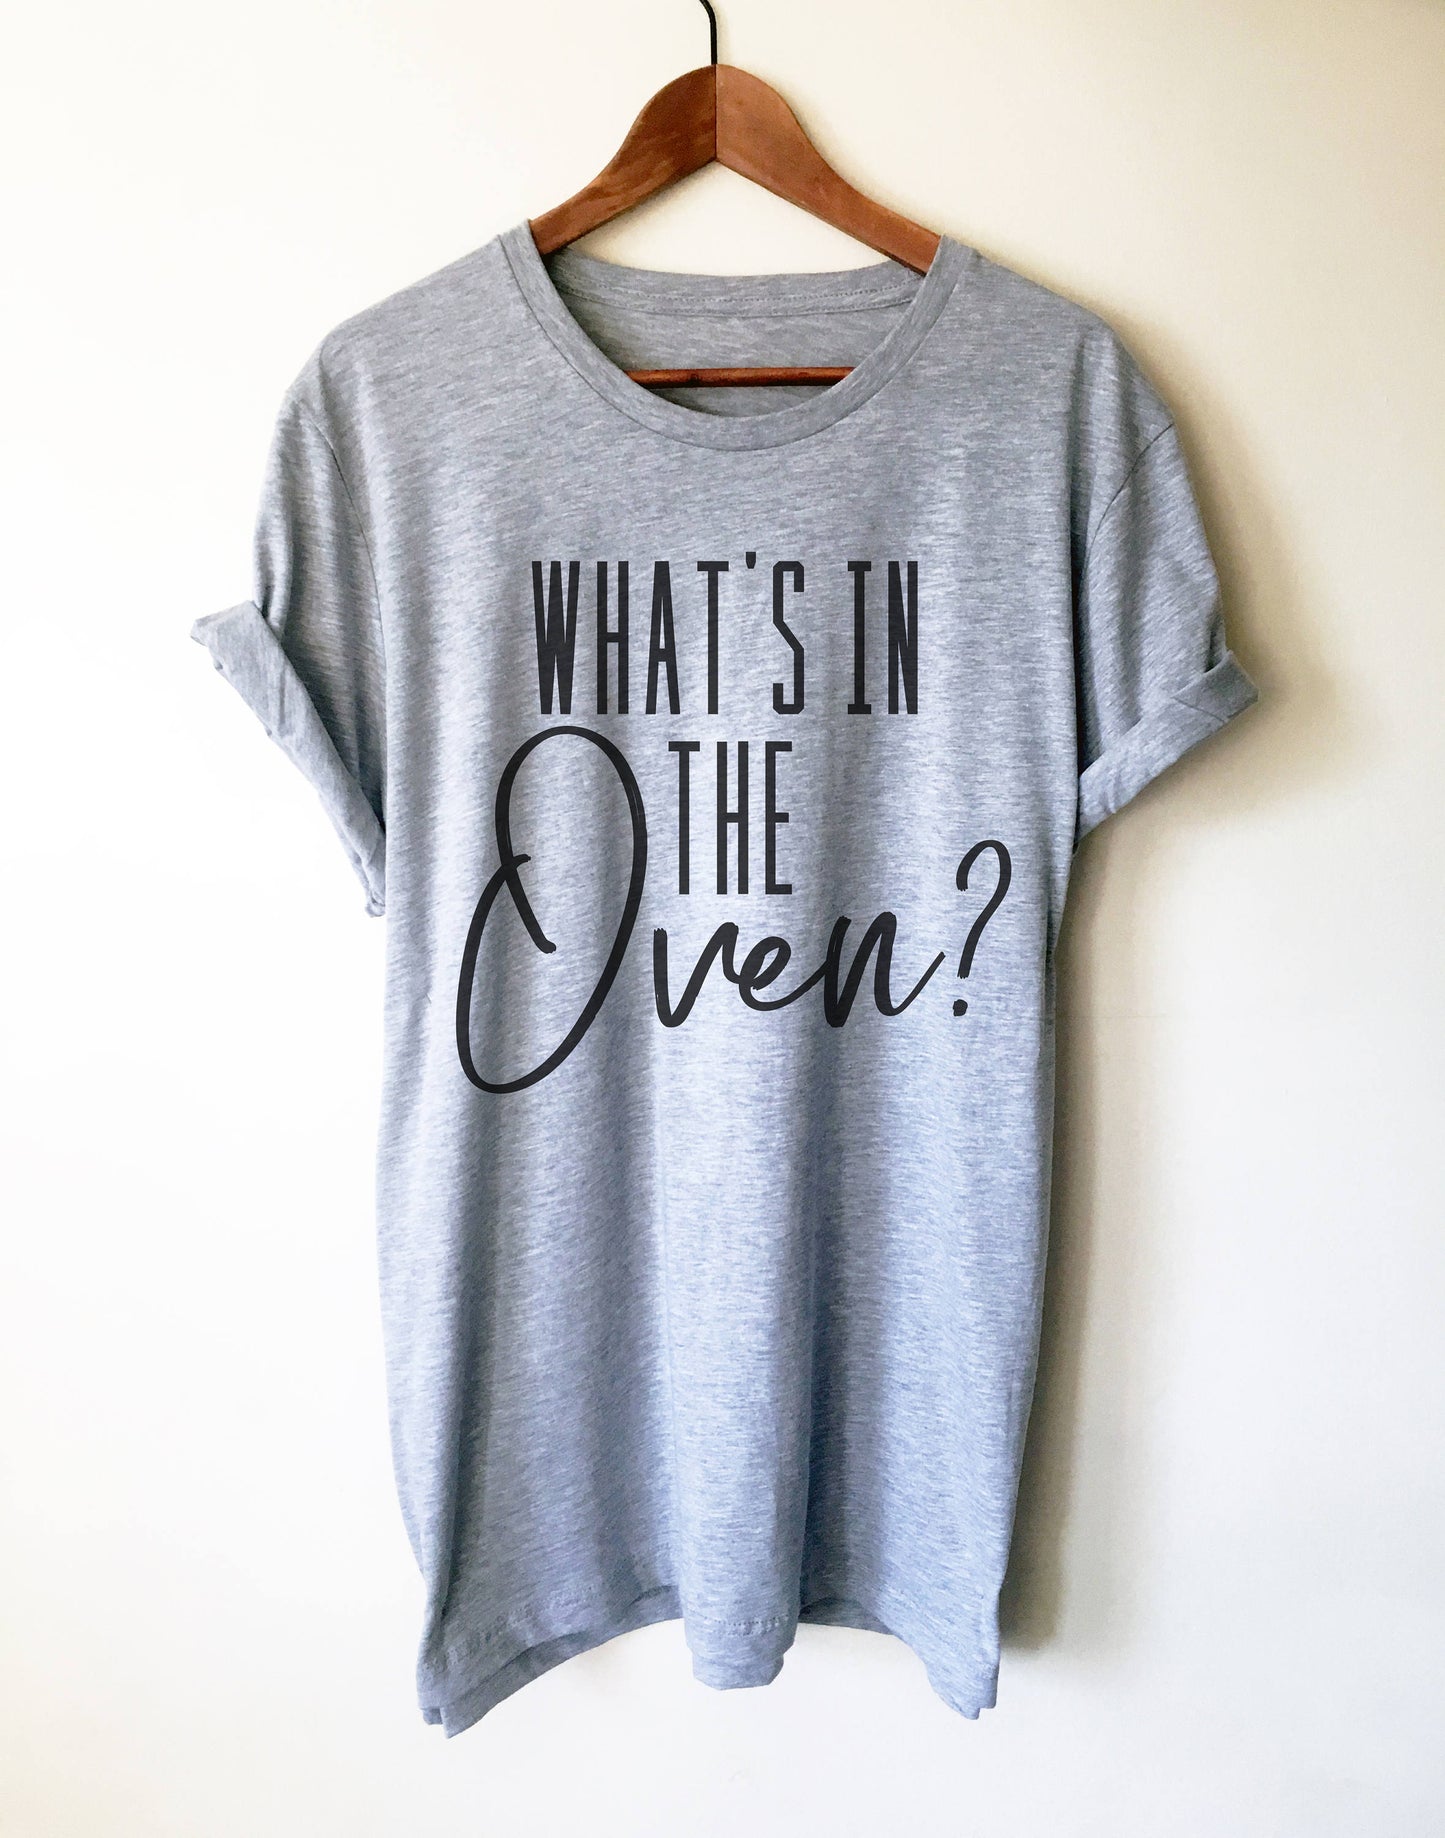 What's In The Oven Unisex Shirt - Pregnancy Announcement Shirt, Pregnancy Reveal Shirt, Gender Reveal Shirt, Gender Reveal Party Gift